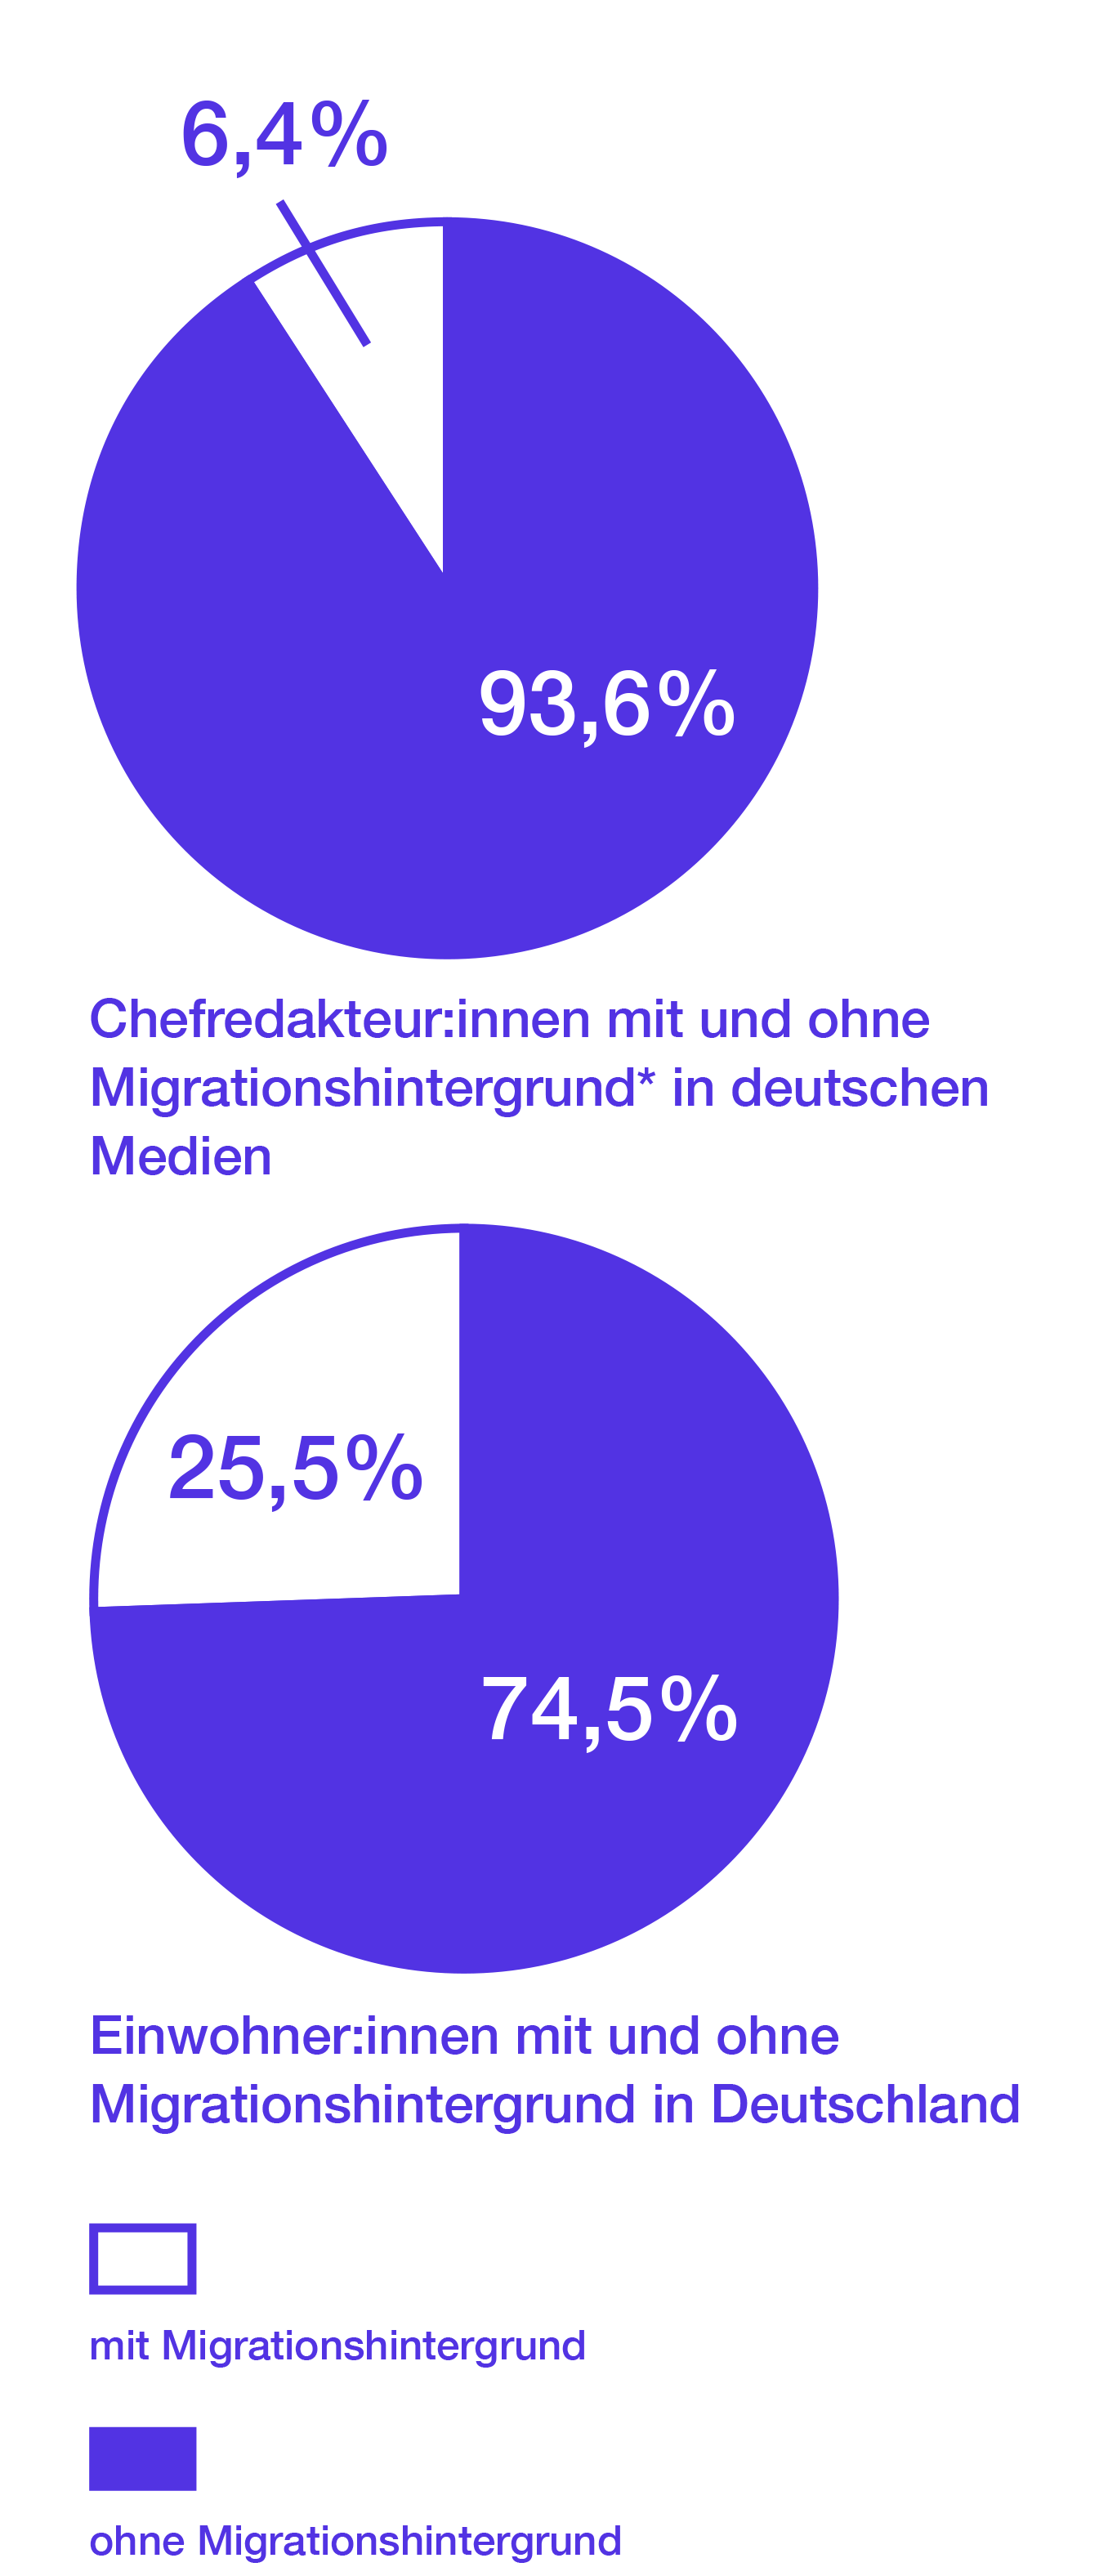 Editors-in-chief with an immigrant background 6,4%. Population with an immigrant background 25,5%. Source: Chefredakteur*innenstudie.